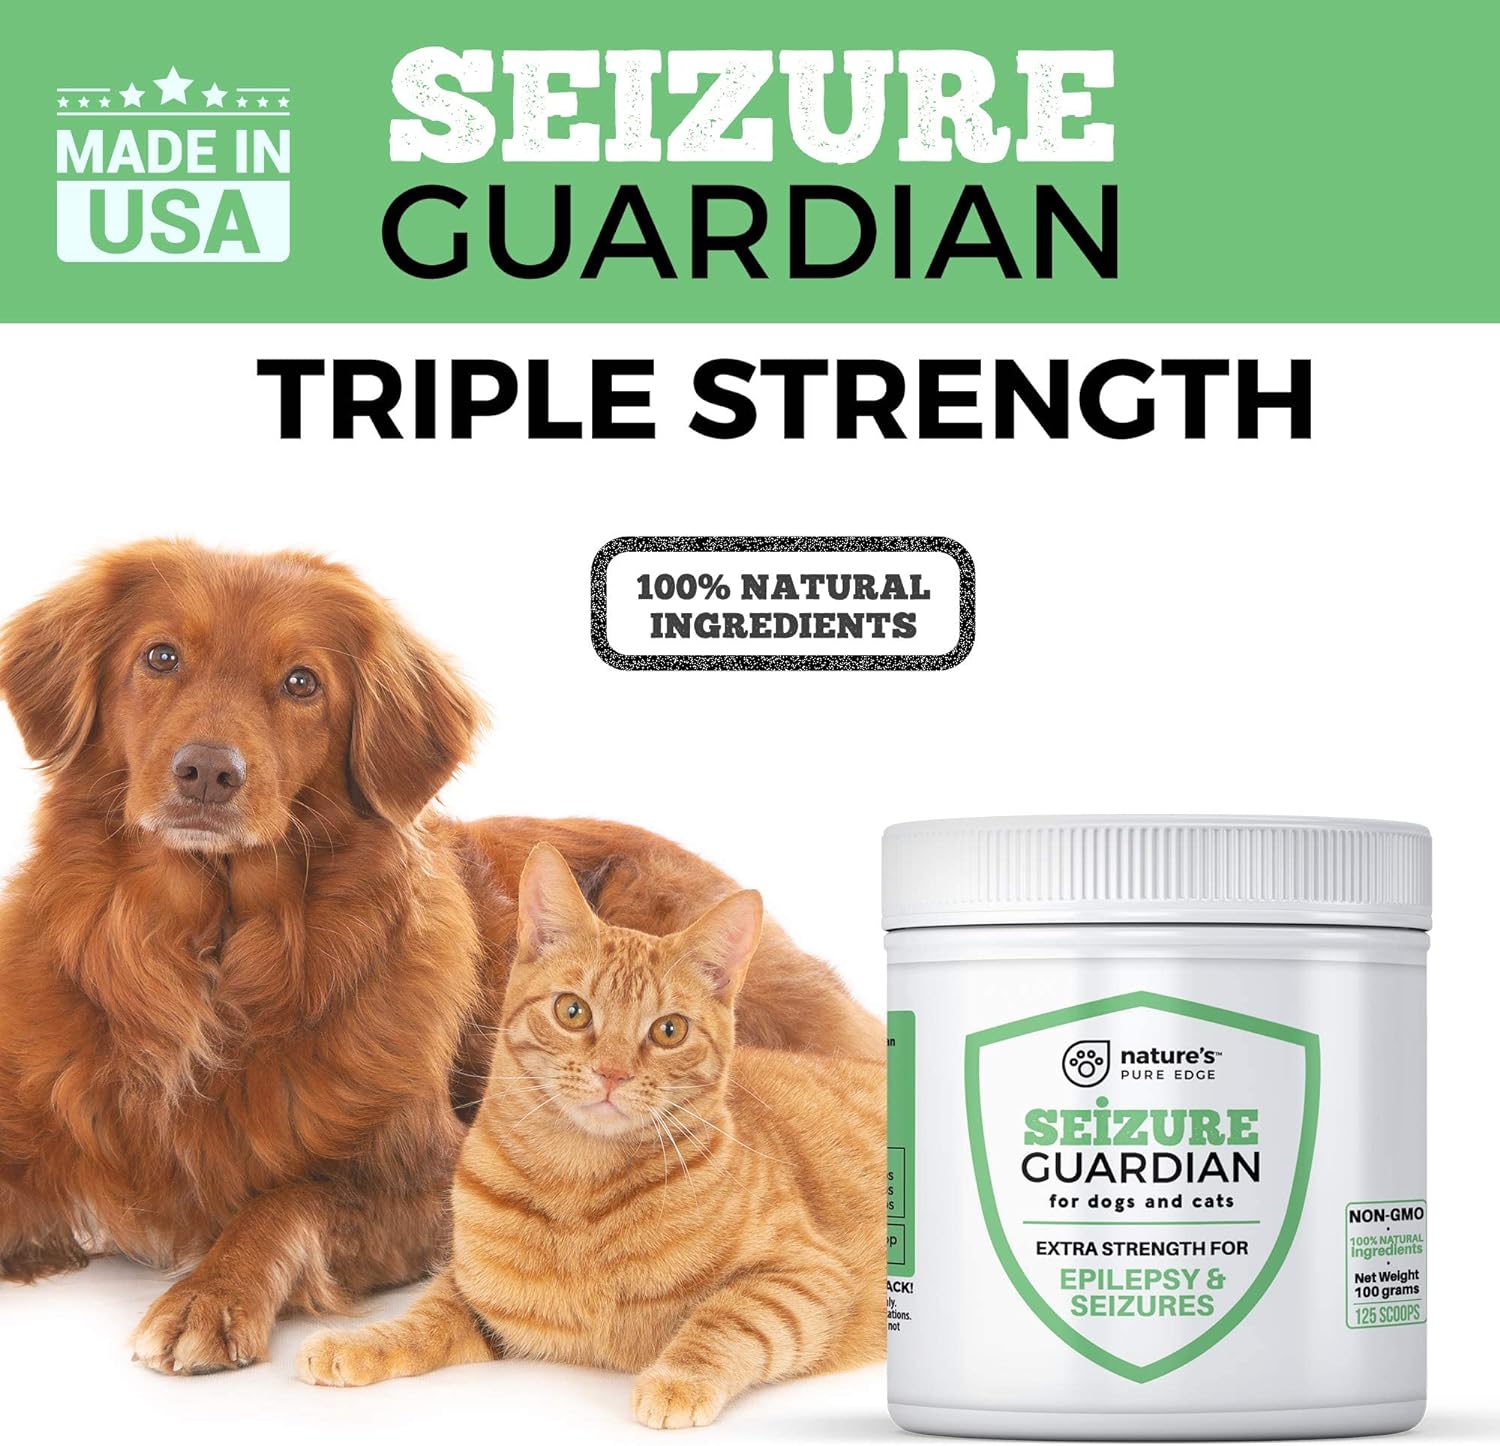 Seizure Support and Calming Aid for Dogs and Cats - All Natural Epilepsy and Seizure Aid. Hemp, Ashwagandha, Blue Vervain, Valerian, L-tryptophan, L-Taurine, Chamomile, Milk Thistle, Turmeric. : Pet Supplies